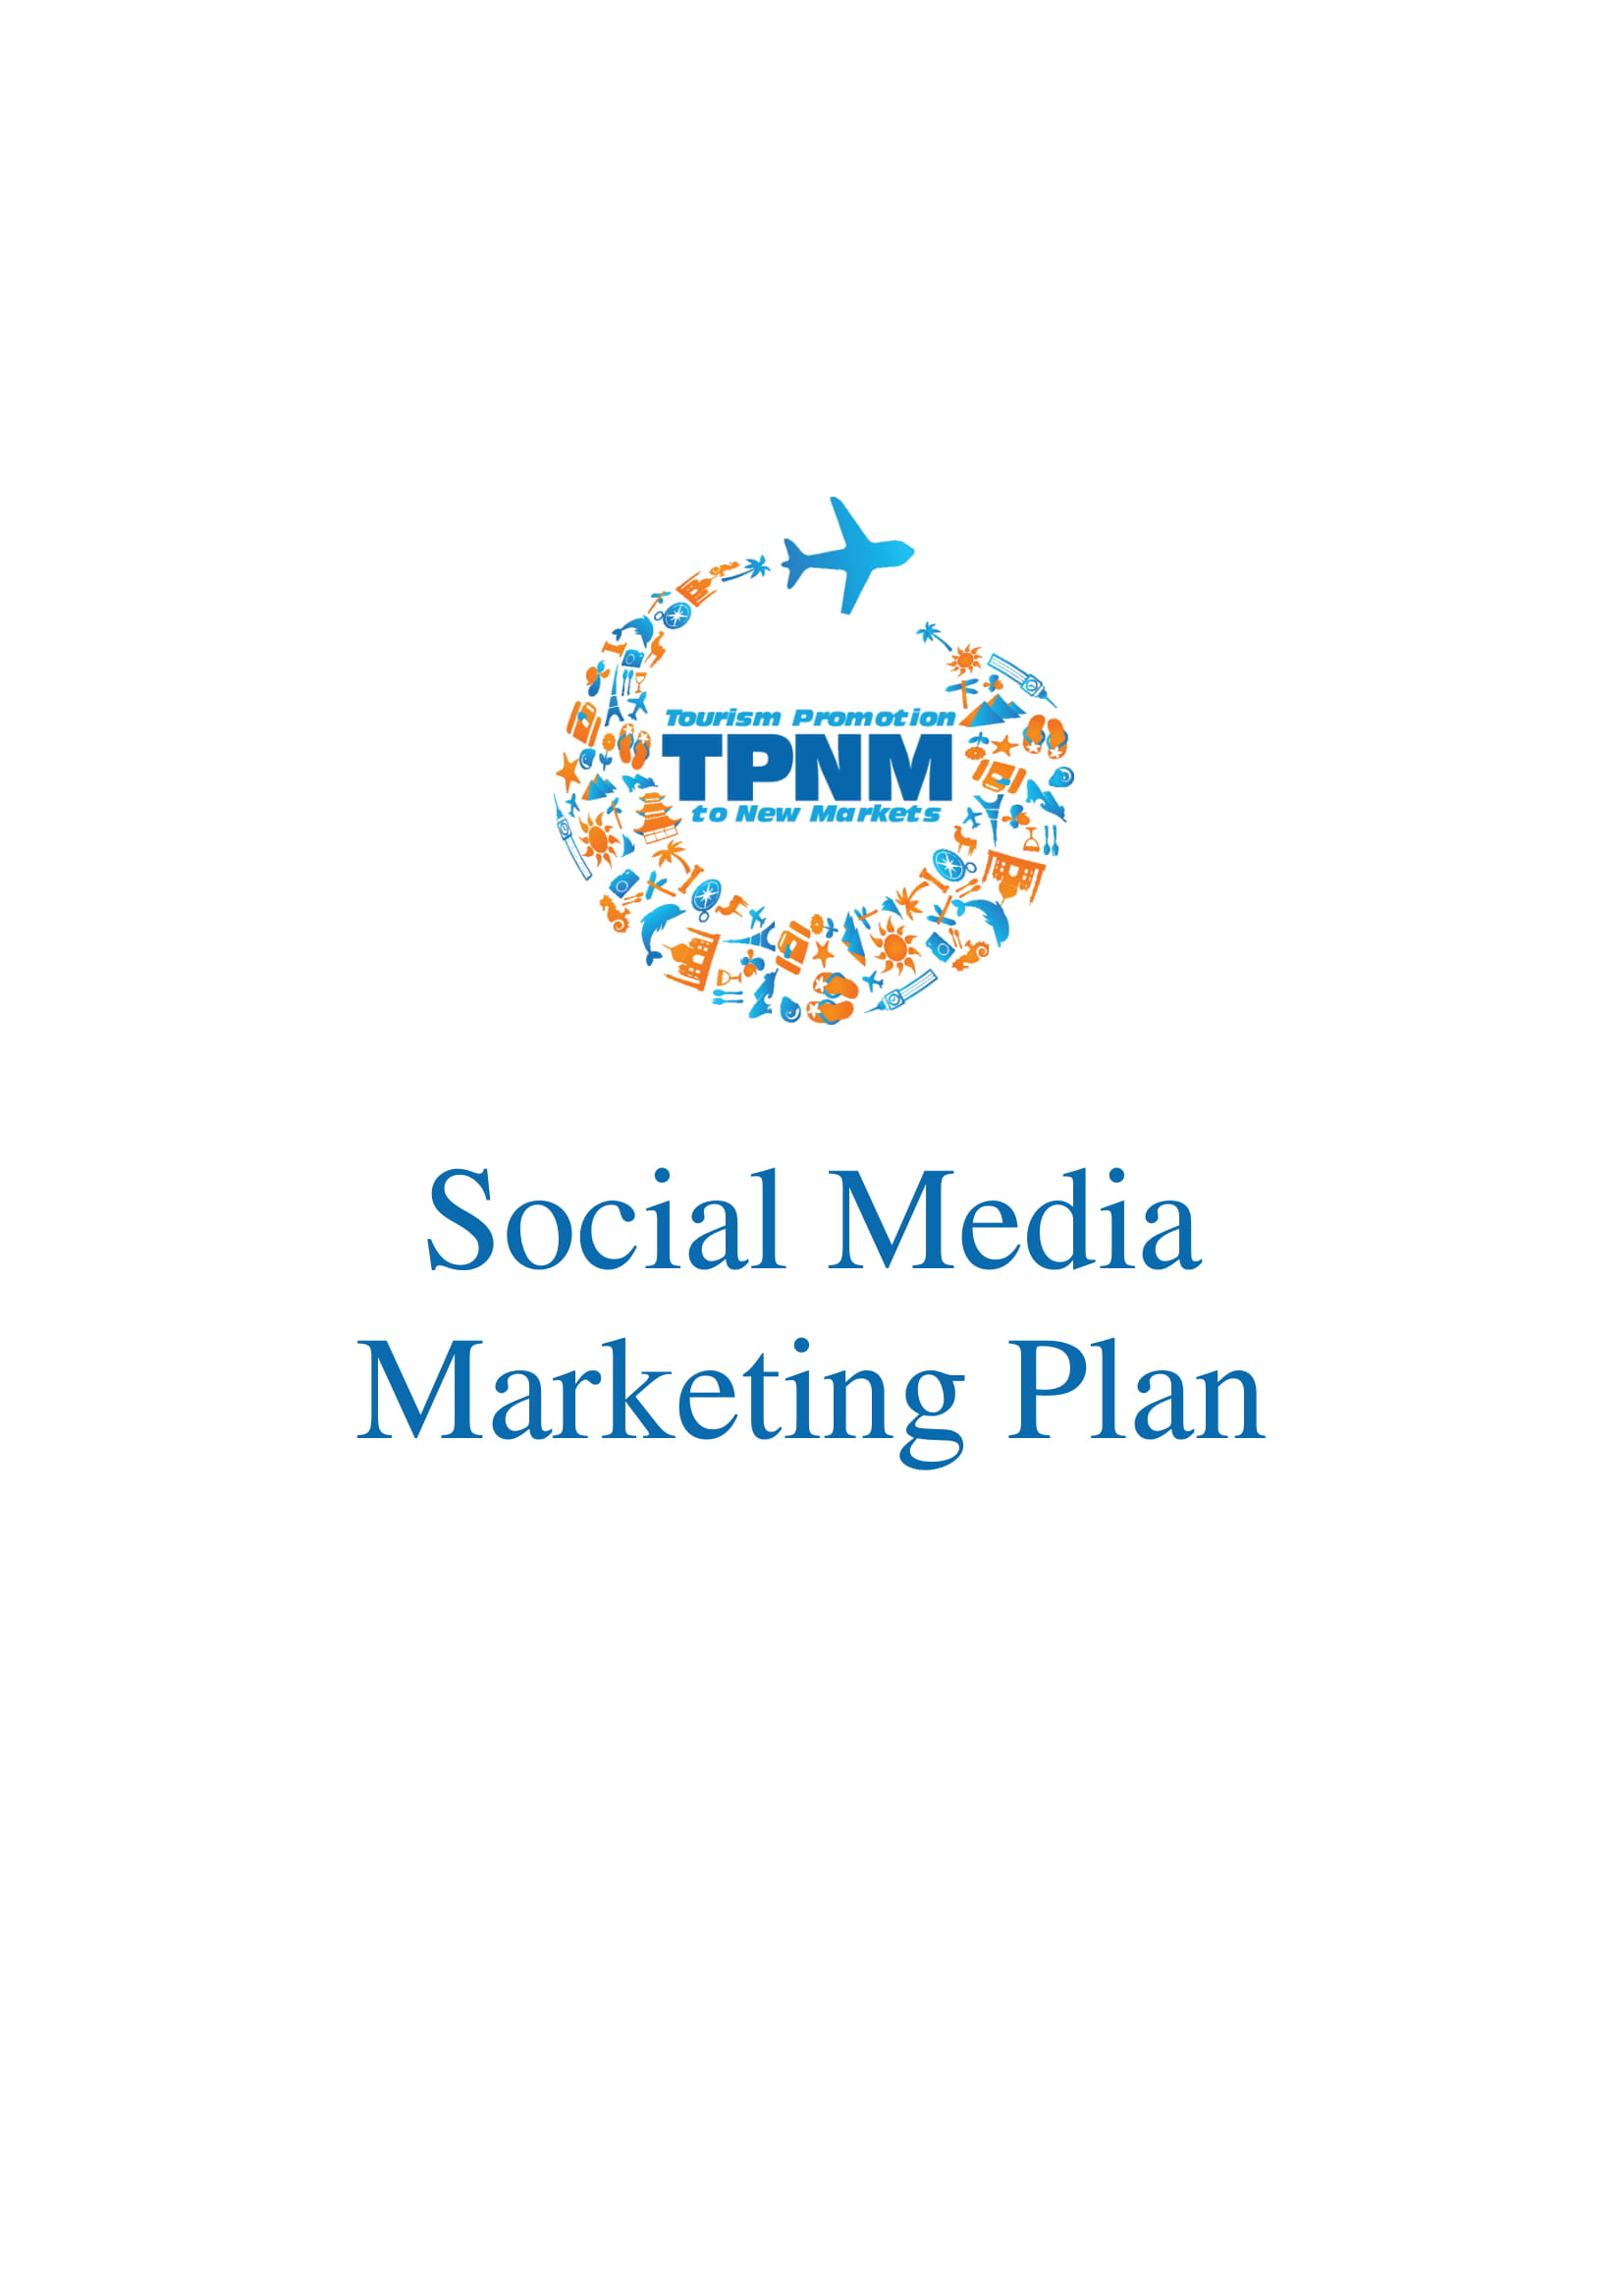 social media marketing plan and proposal for restaurants and other businesses example 01